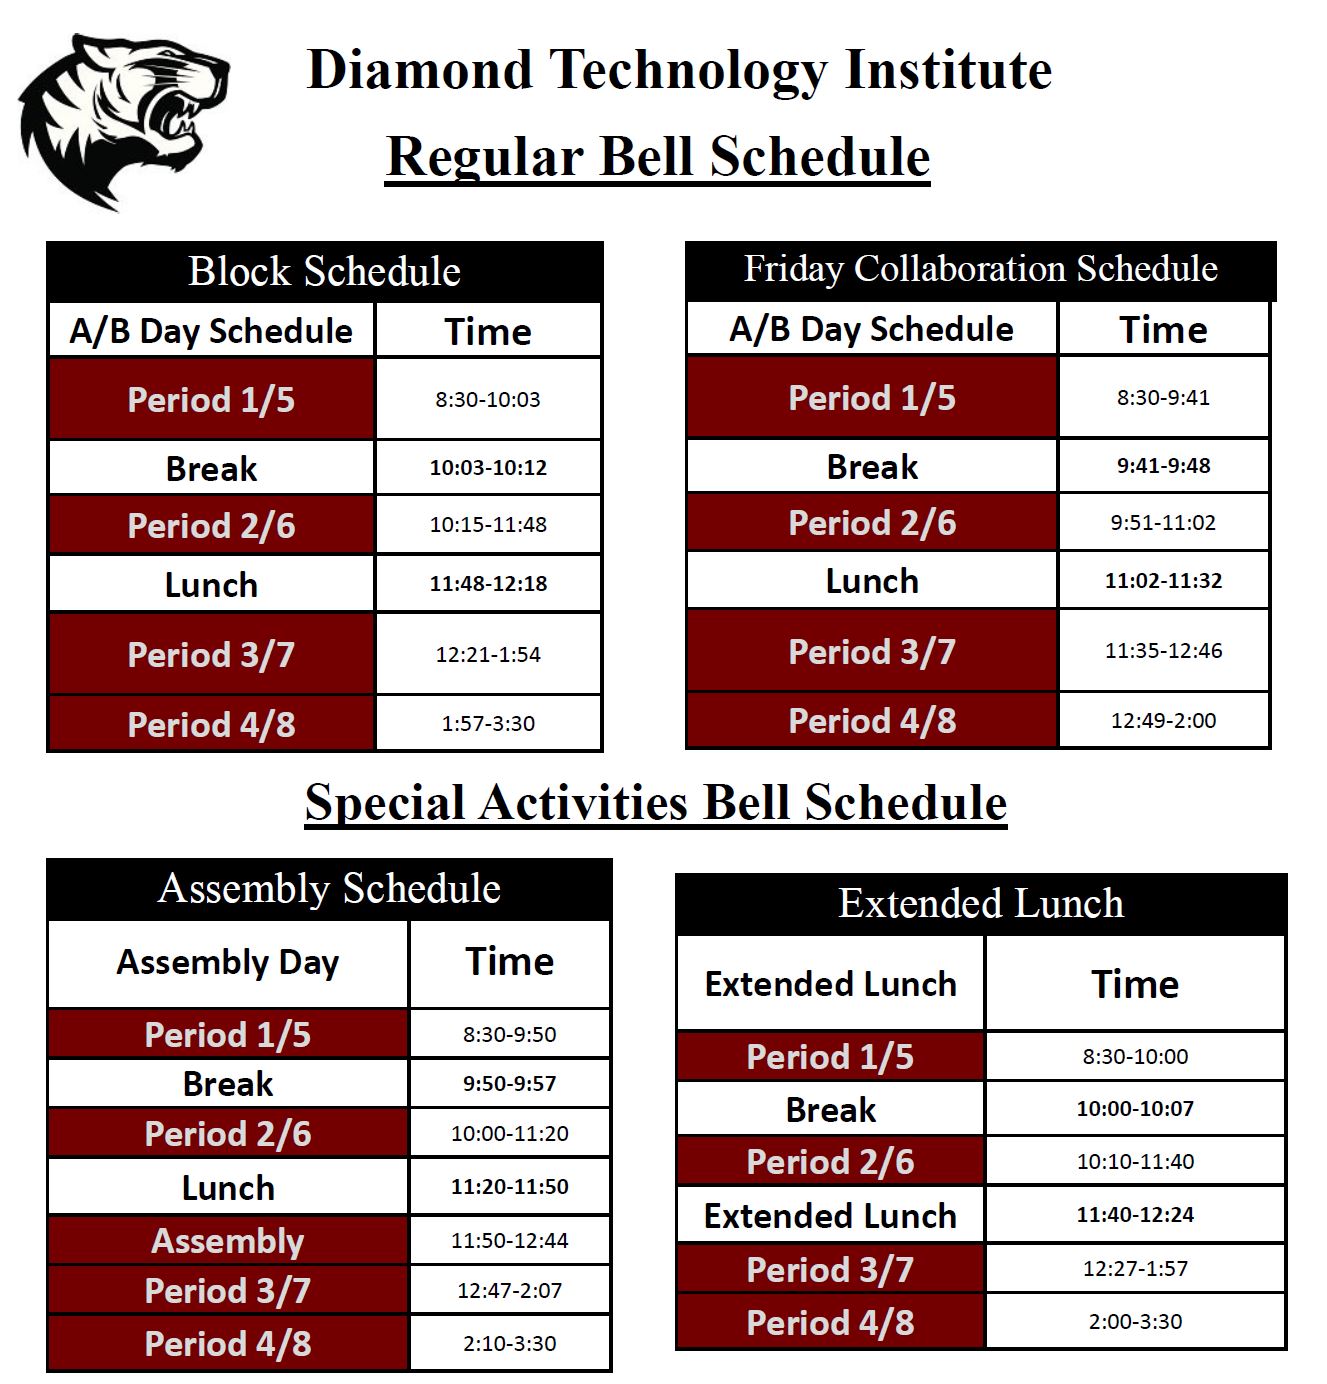 ADA compliant version of the bell schedule is linked above.